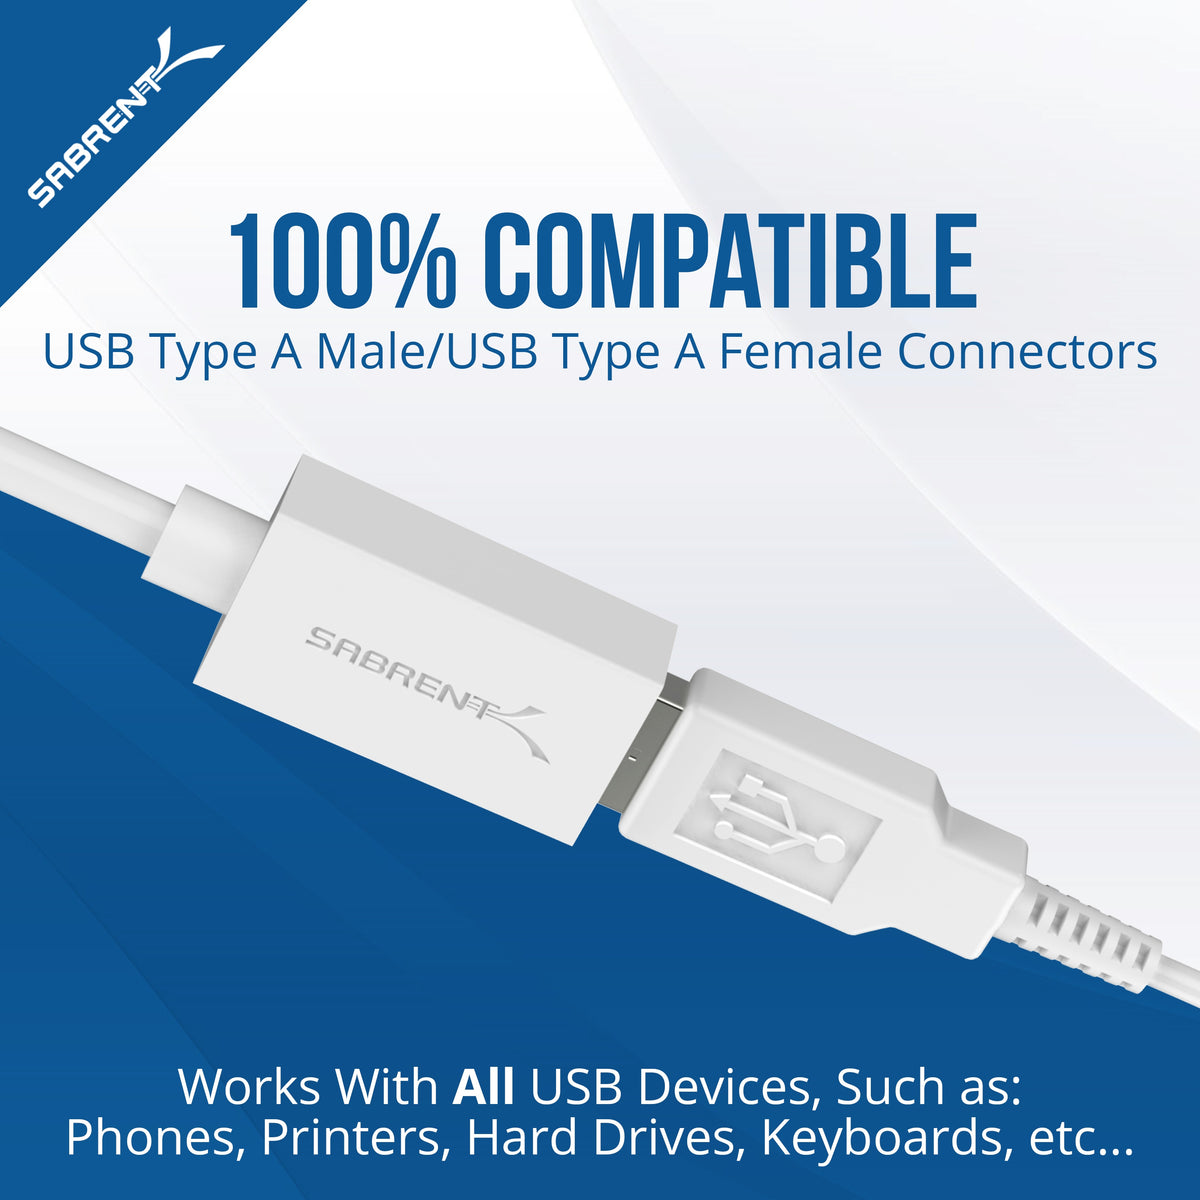 22AWG USB 3.0 Extension Cable - A-Male to A-Female [White] 10 Feet